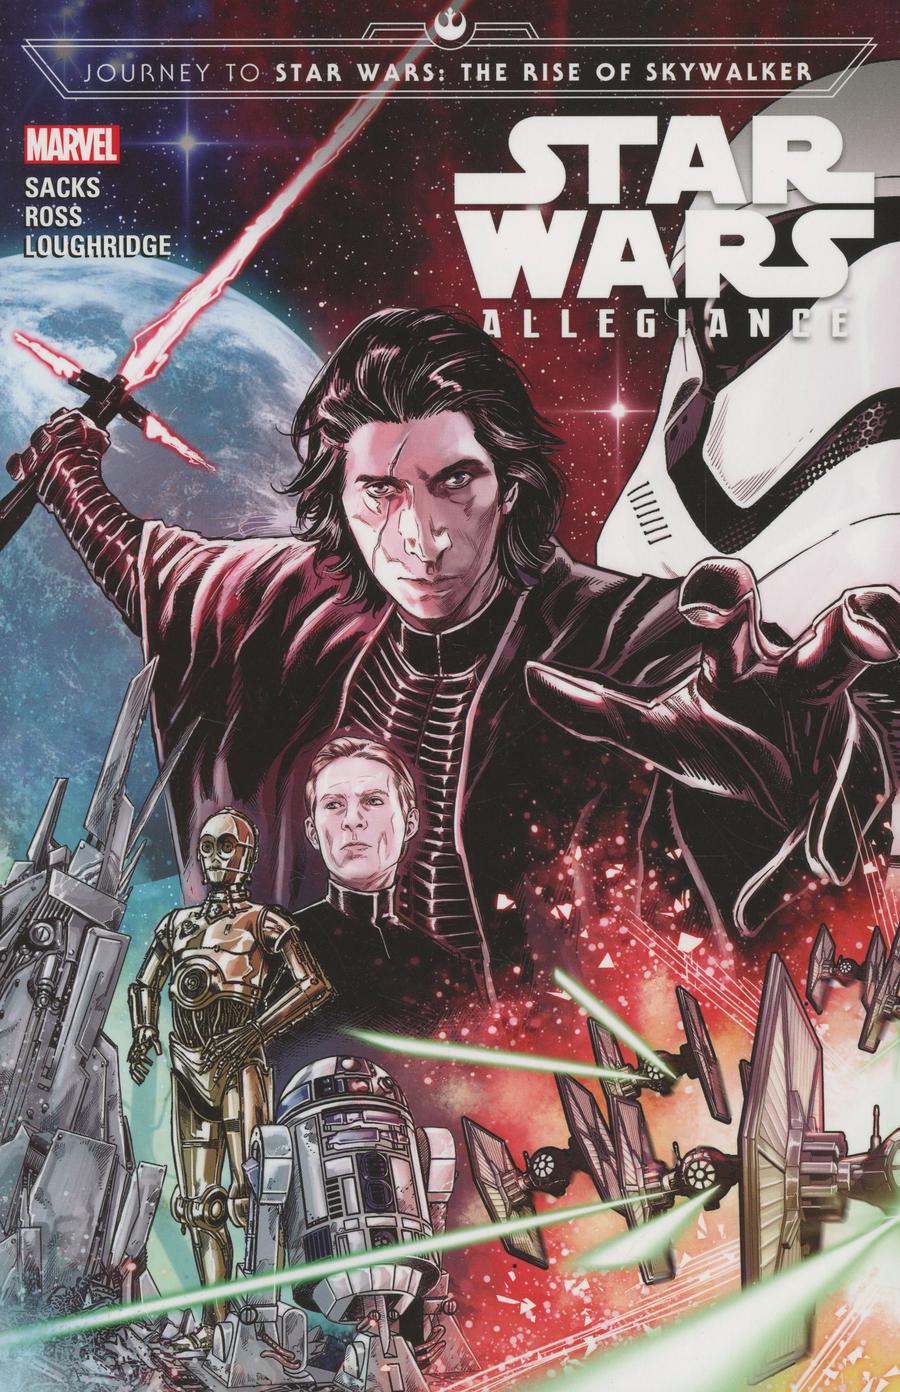 Journey To Star Wars Rise Of Skywalker Allegiance TP Direct Market Marco Checchetto Kylo Ren Variant Cover